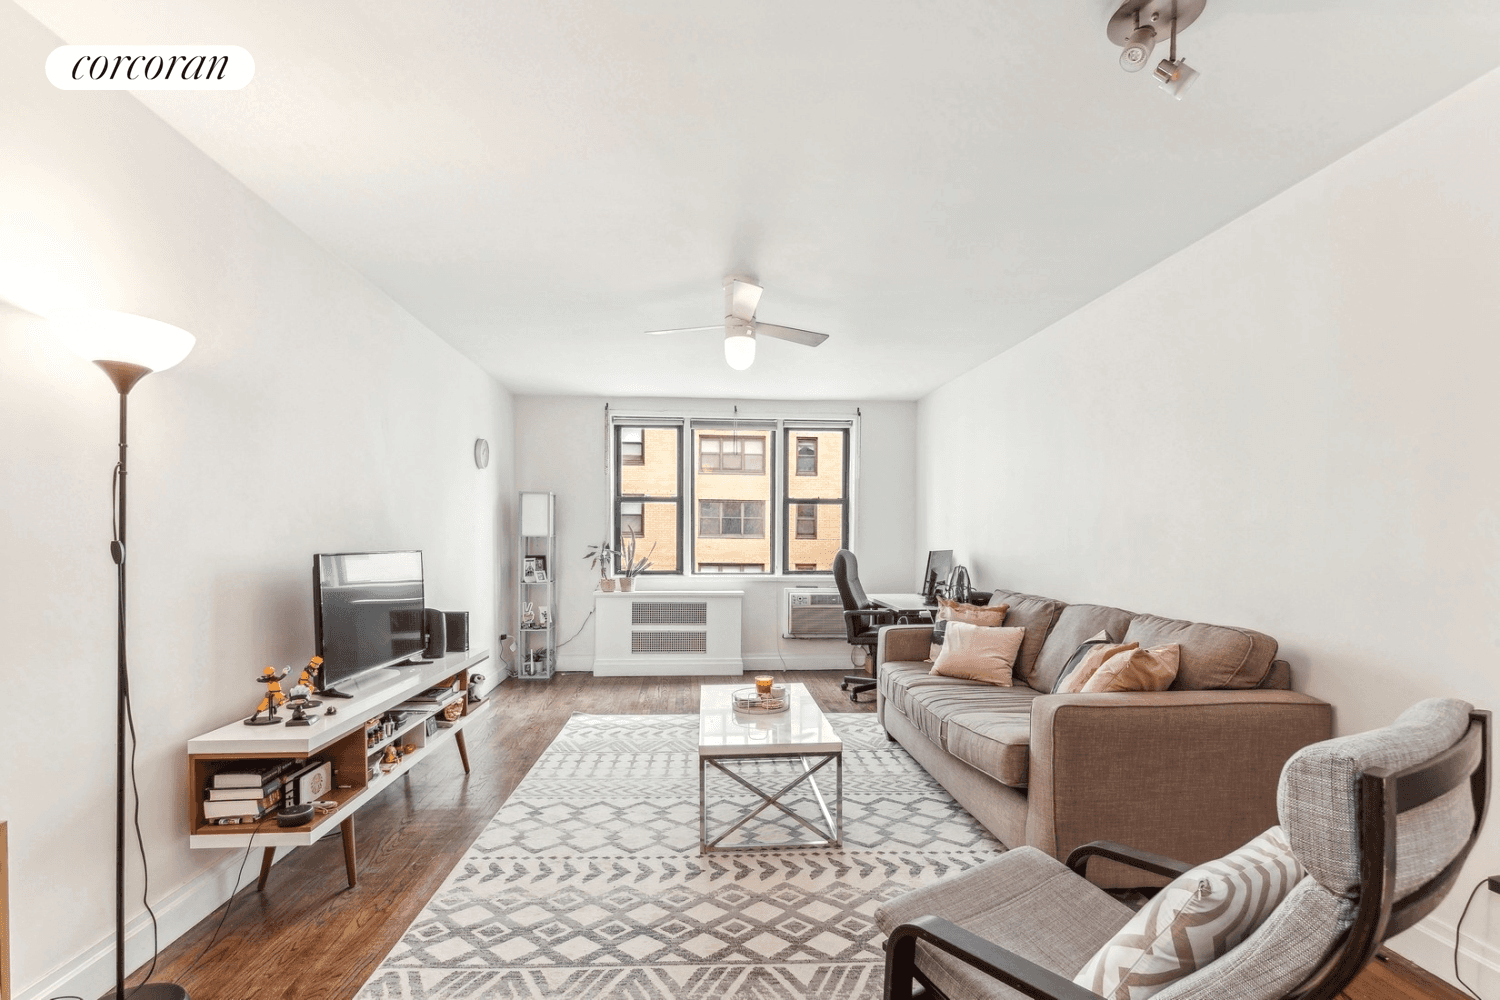 This large 730 sq ft apartment has a wonderful front and back floor thru layout, providing comfort, quiet and privacy unlike side by side units where only a wall separates ...